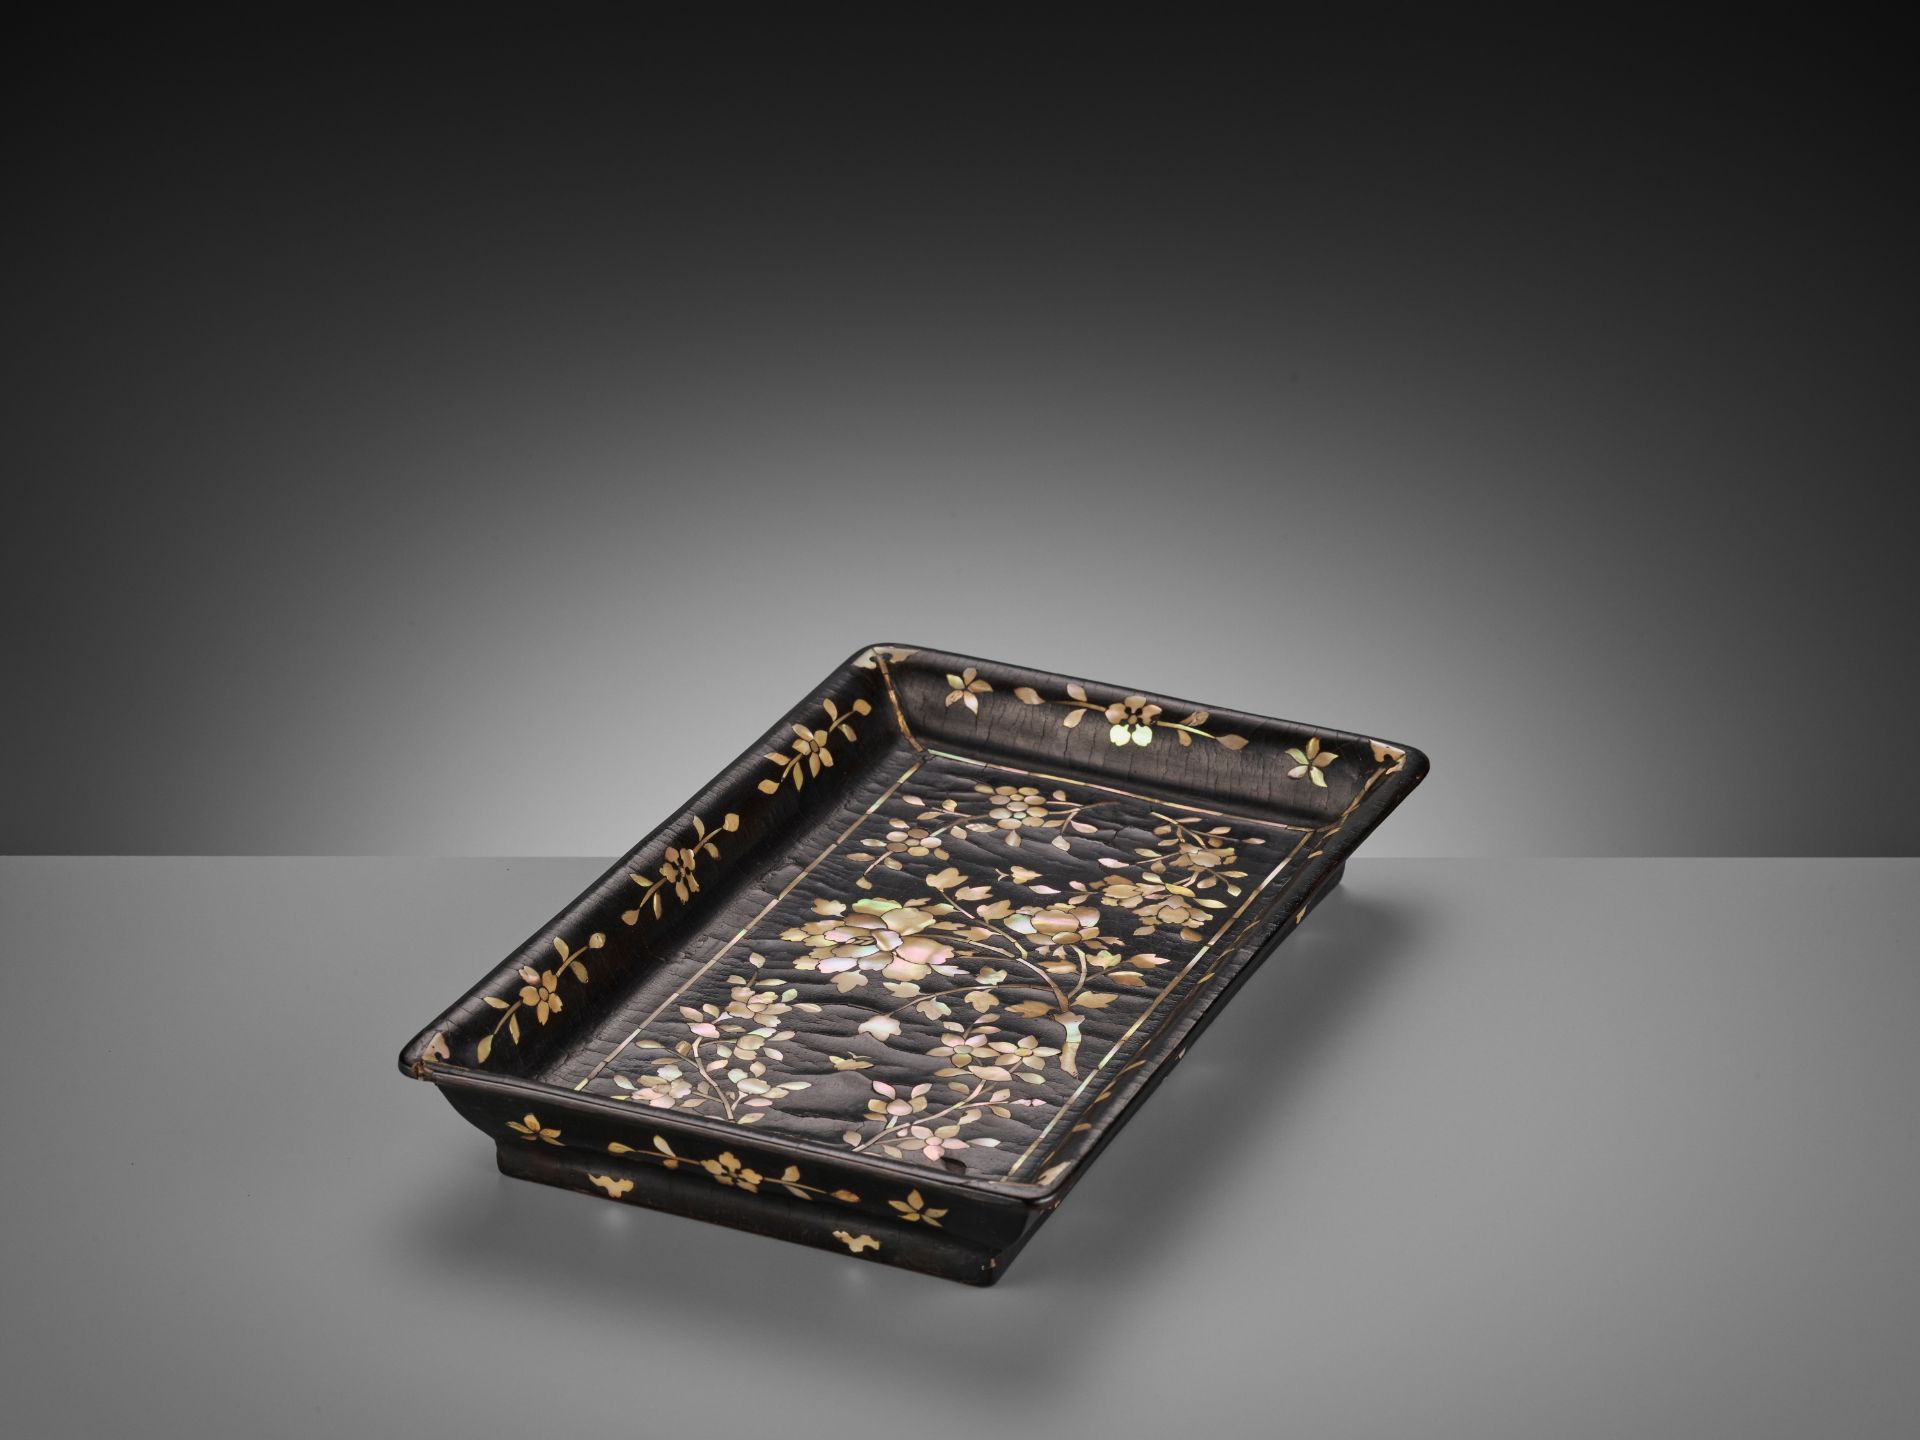 A MOTHER-OF-PEARL INLAID BLACK LACQUER 'PEONY' TRAY, MING DYNASTY - Image 8 of 12